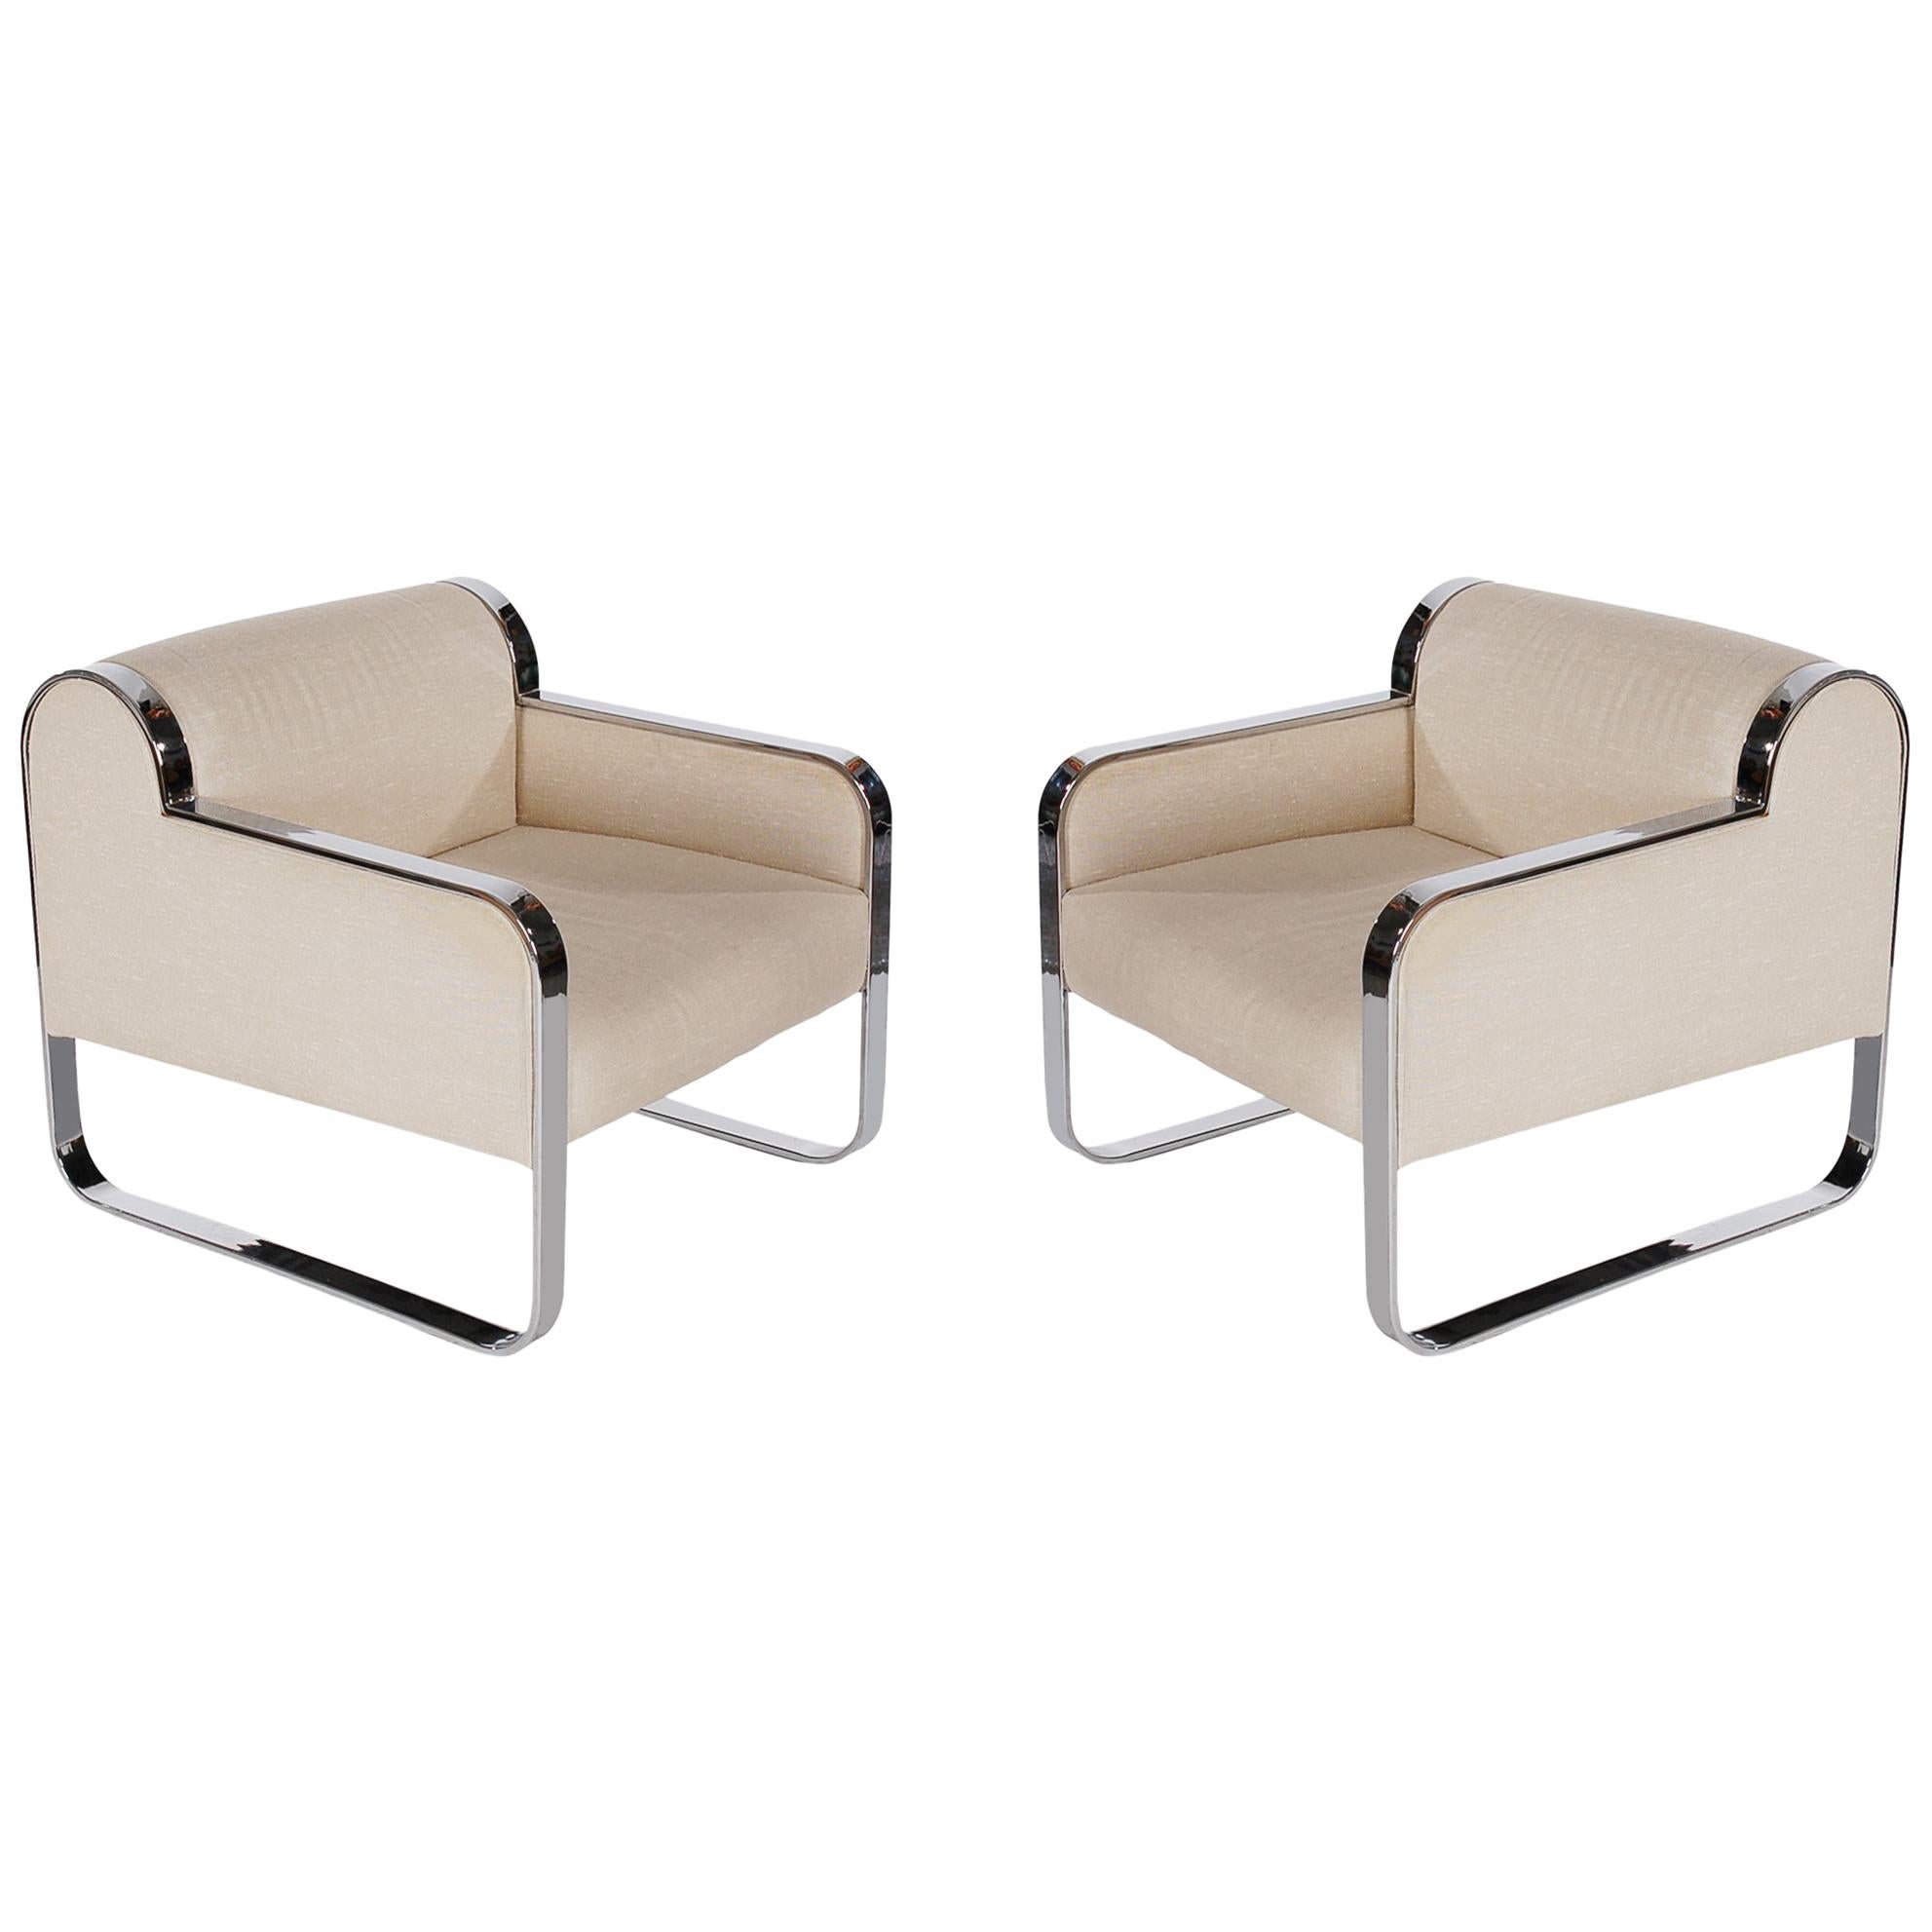 Pair of White Mid-Century Modern Club Lounge Chairs After Milo Baughman